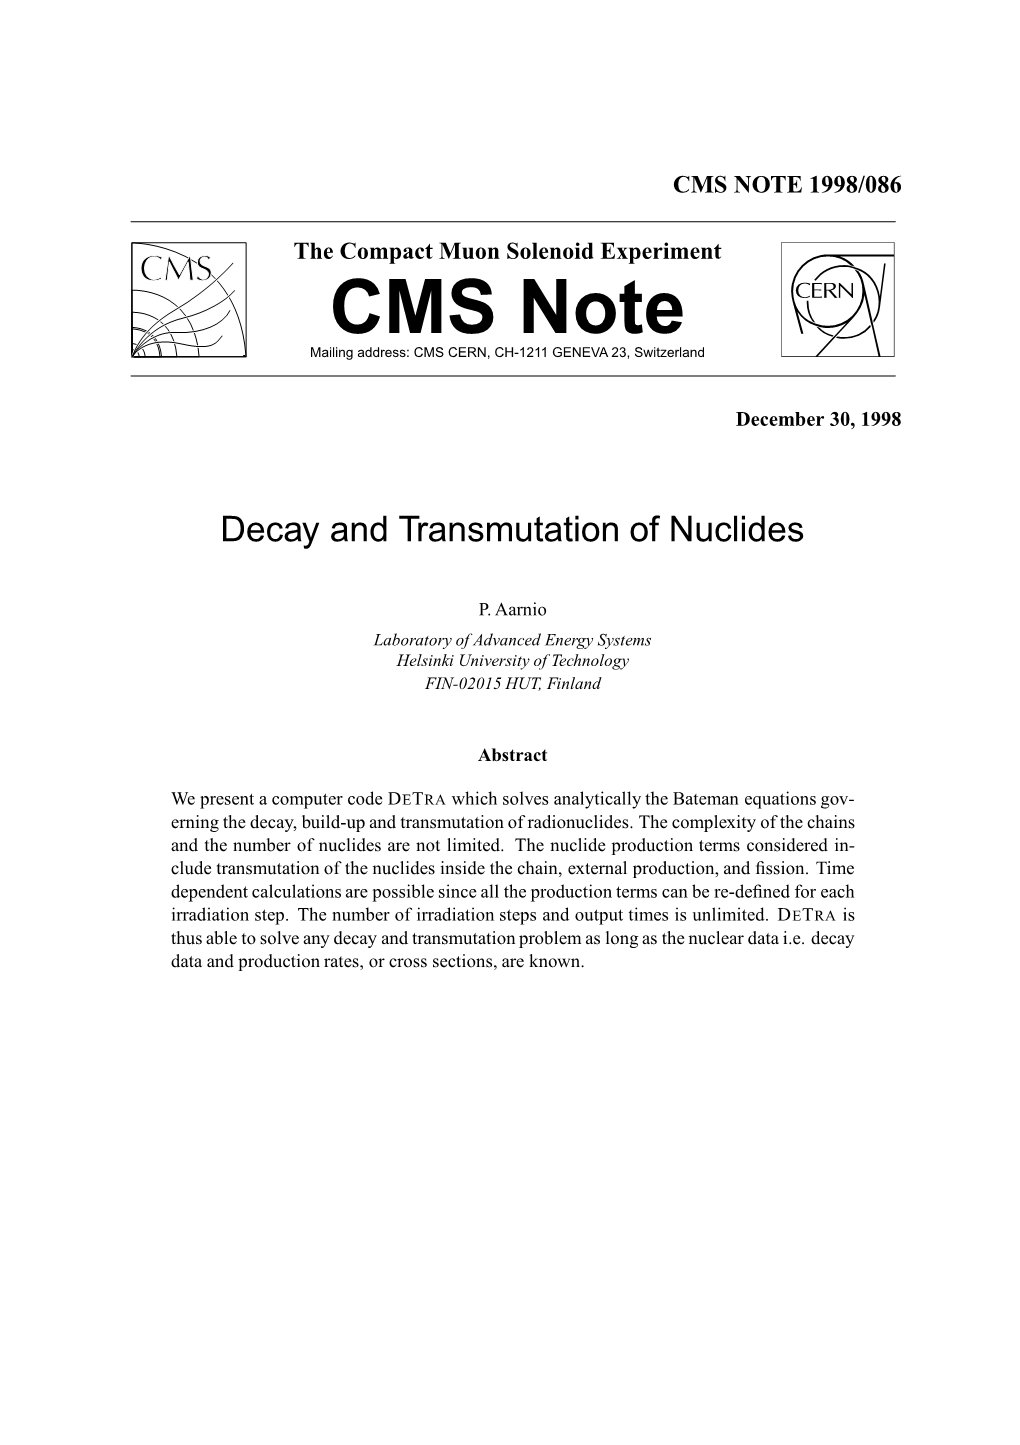 Decay and Transmutation of Nuclides